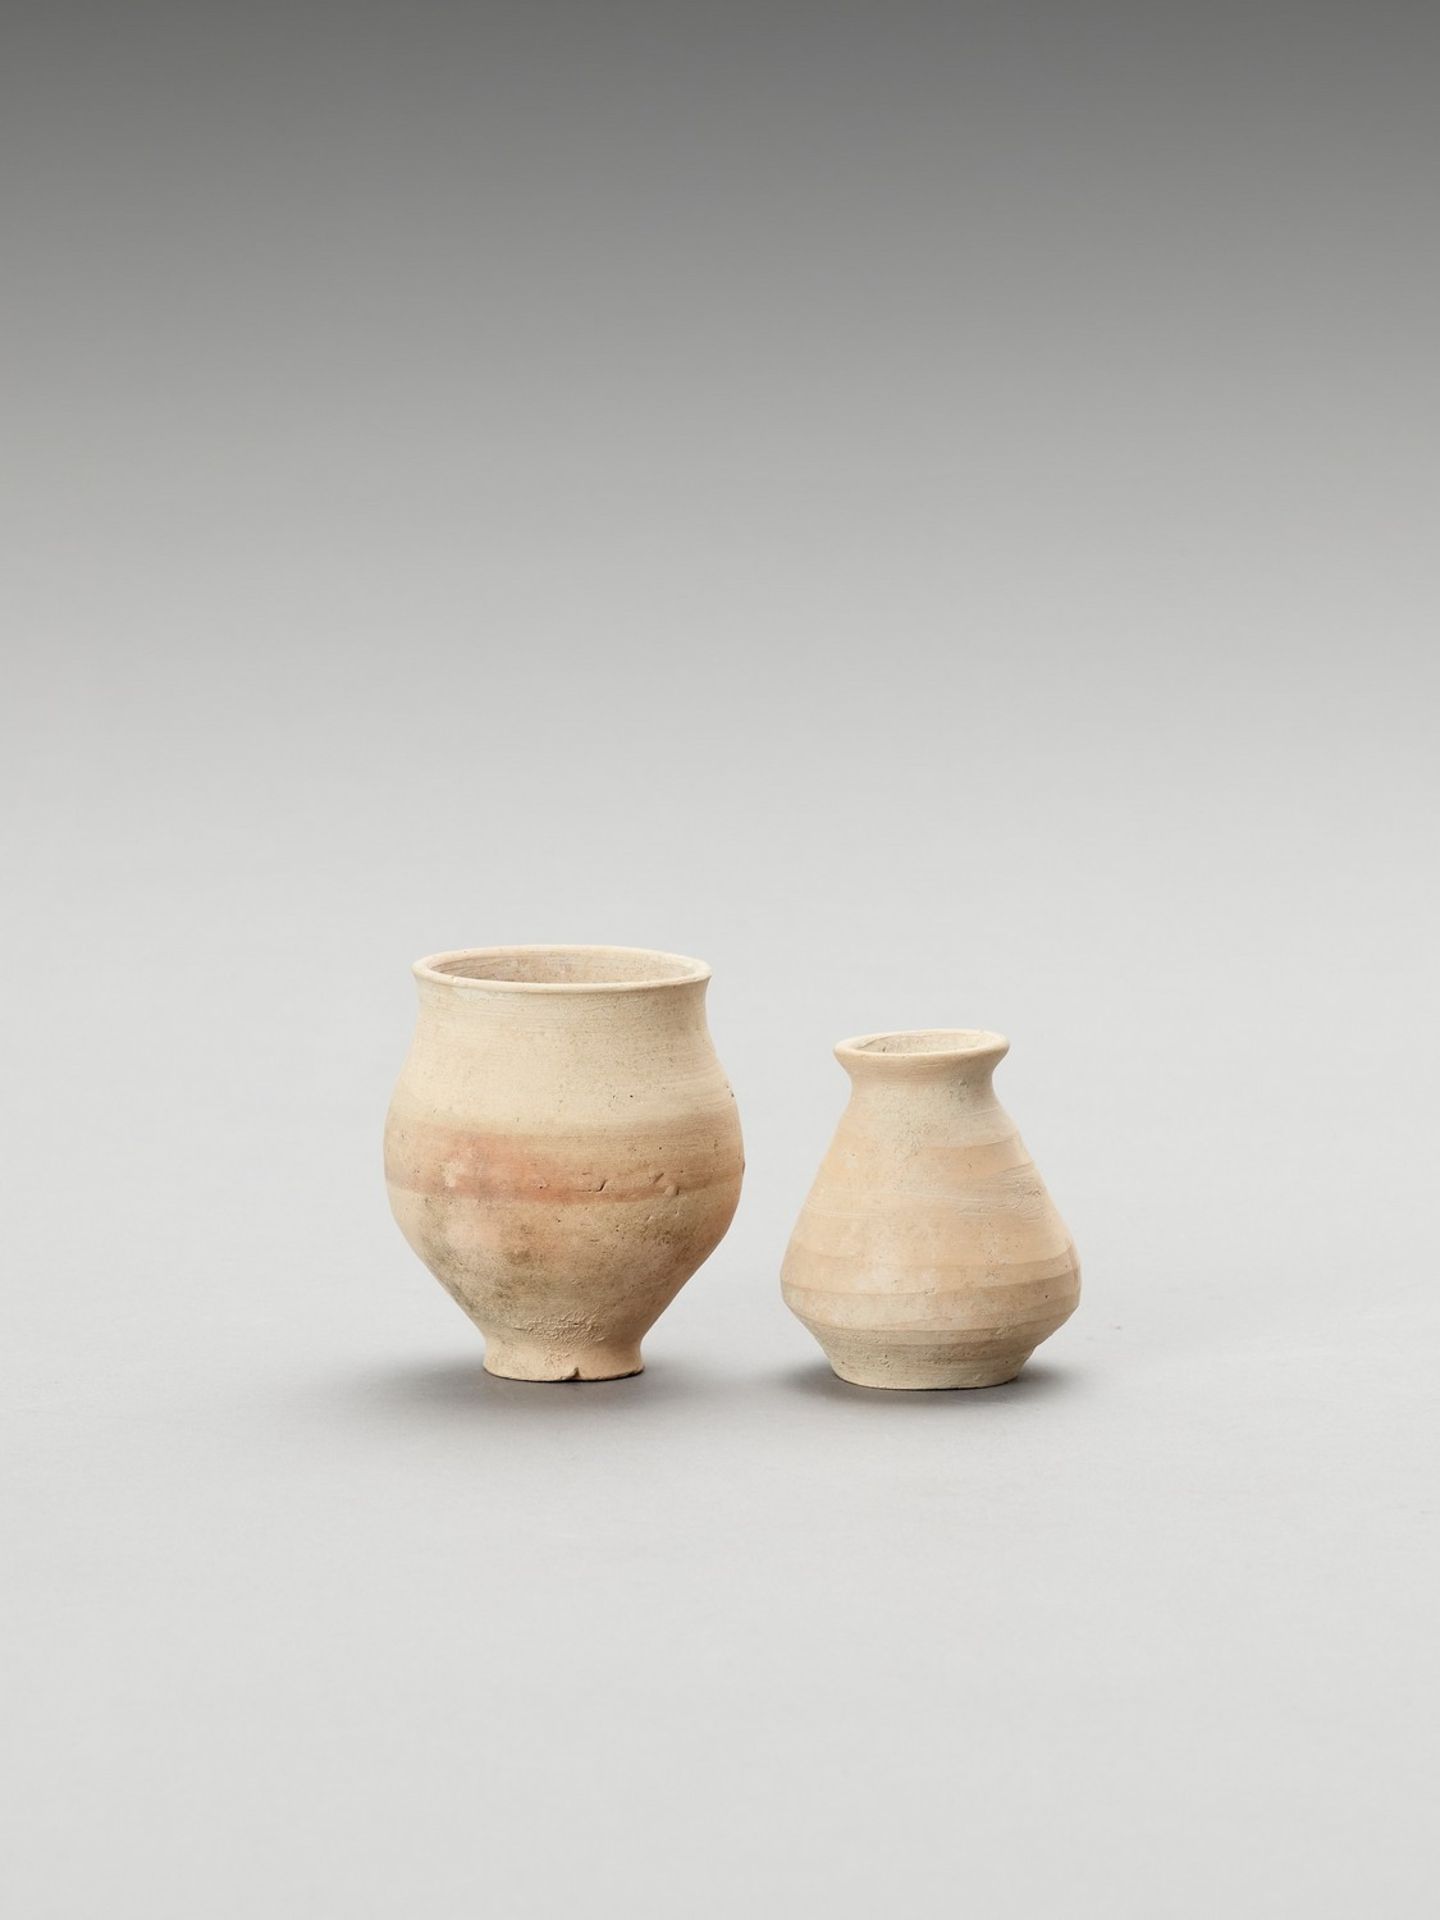 TWO EARLY MEHRGARH SMALL CERAMIC VESSELS - Image 2 of 4